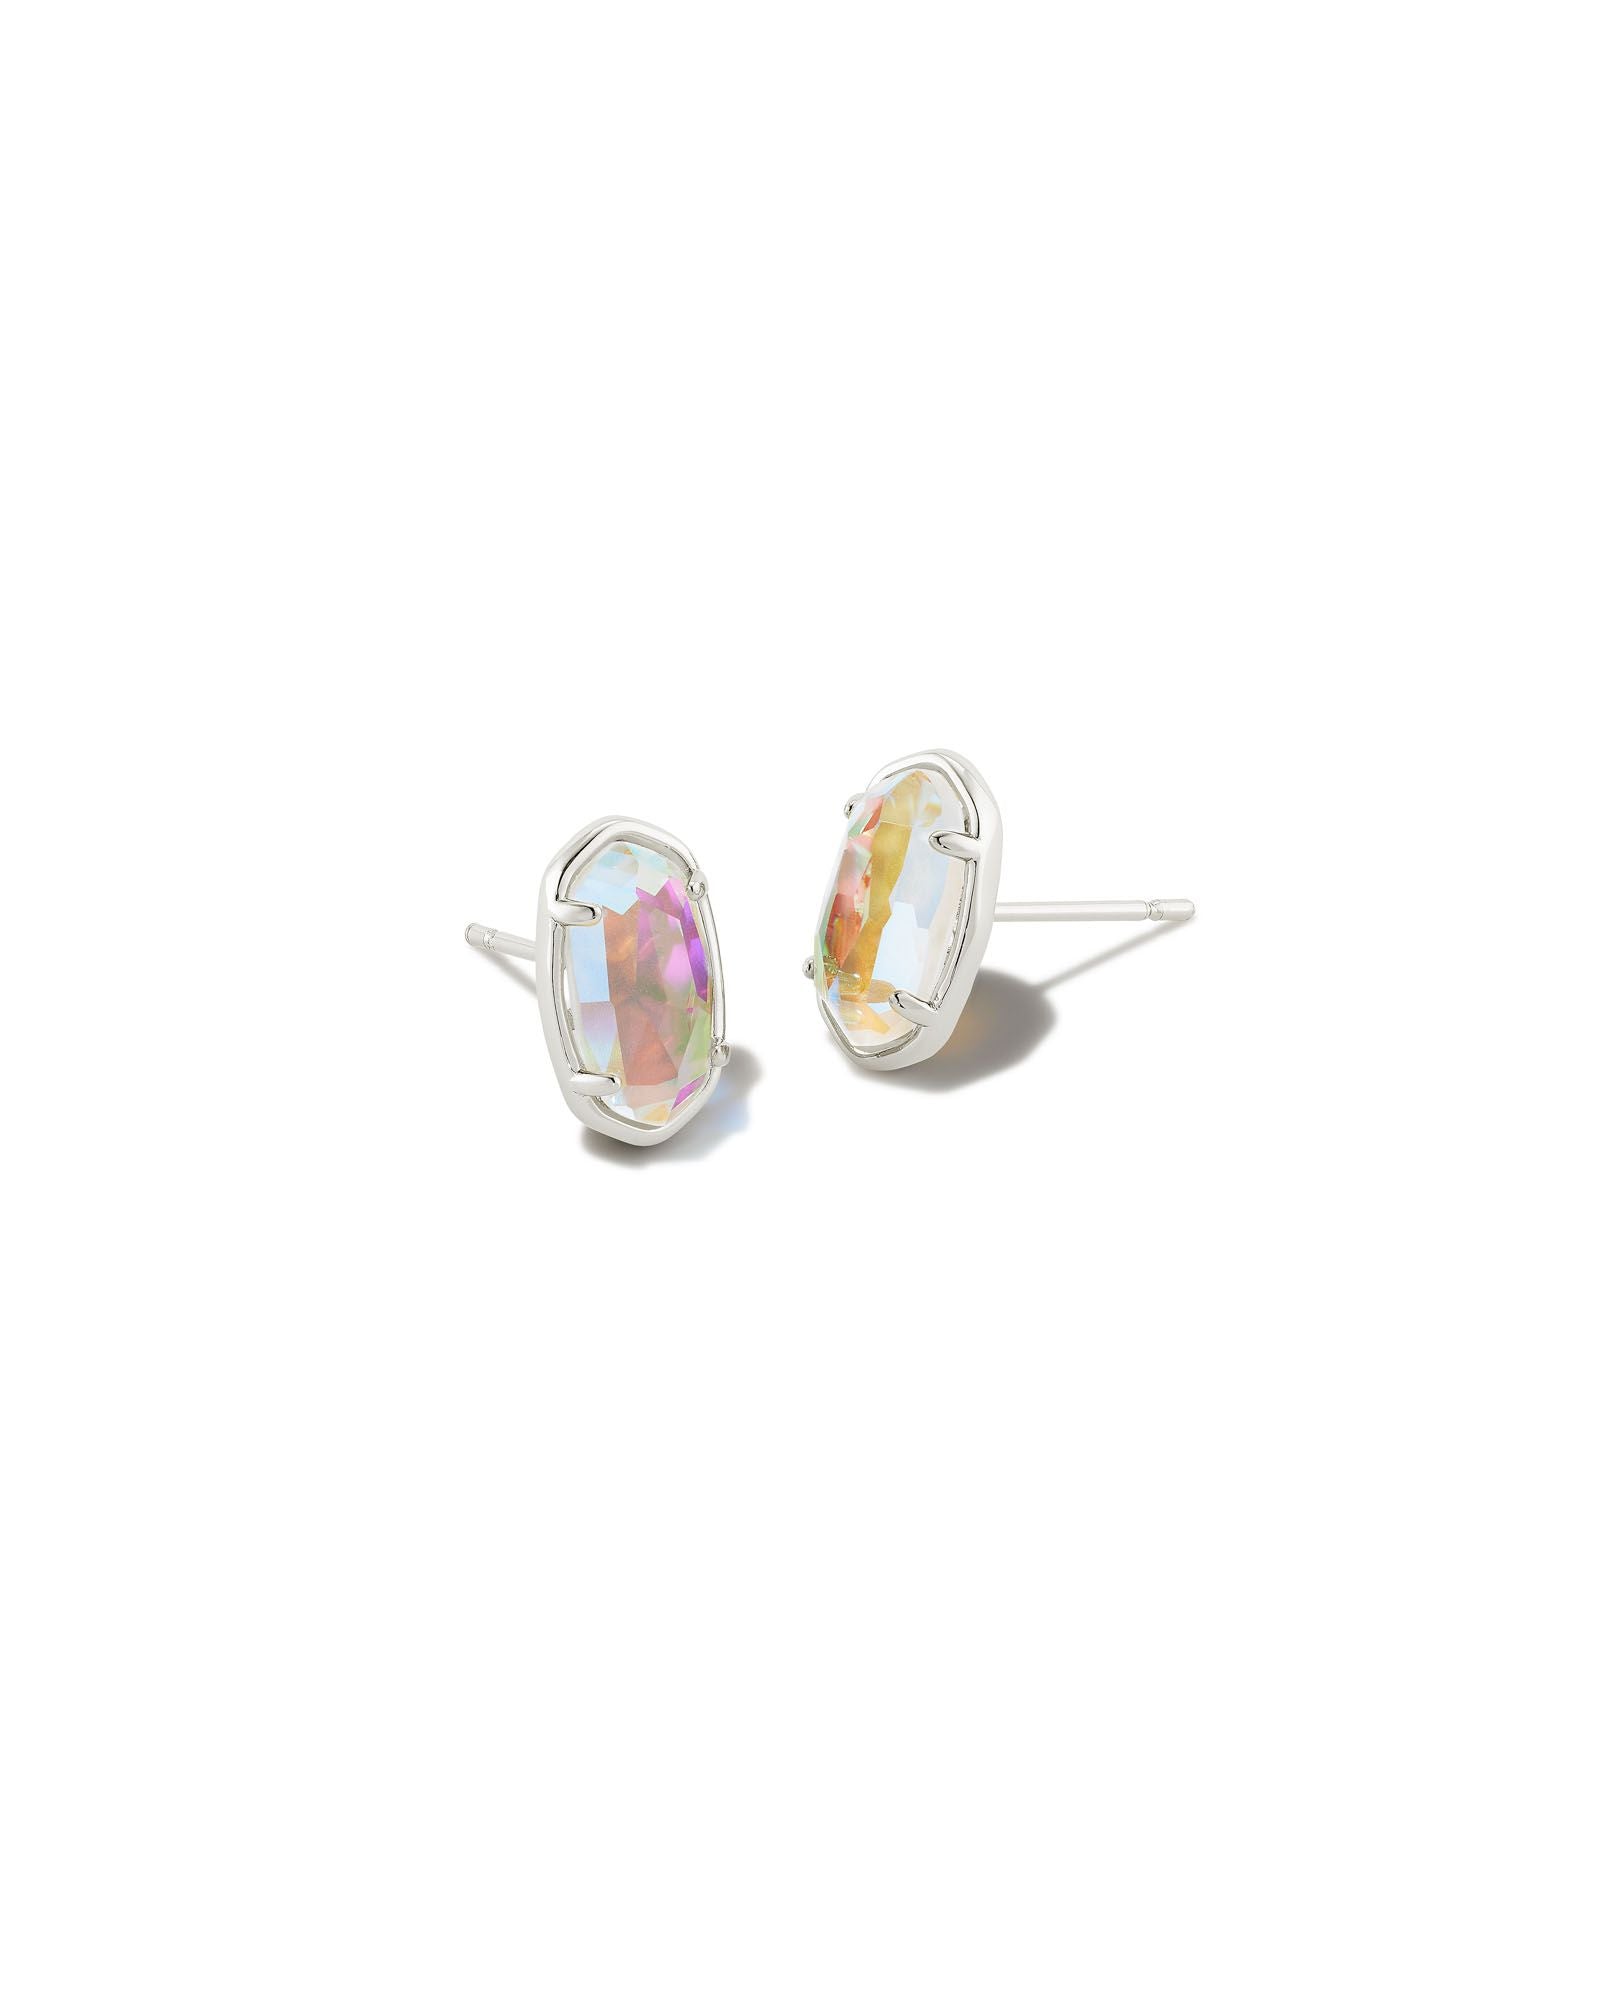 Grayson Stud Earrings Dichroic Glass Silver or Gold